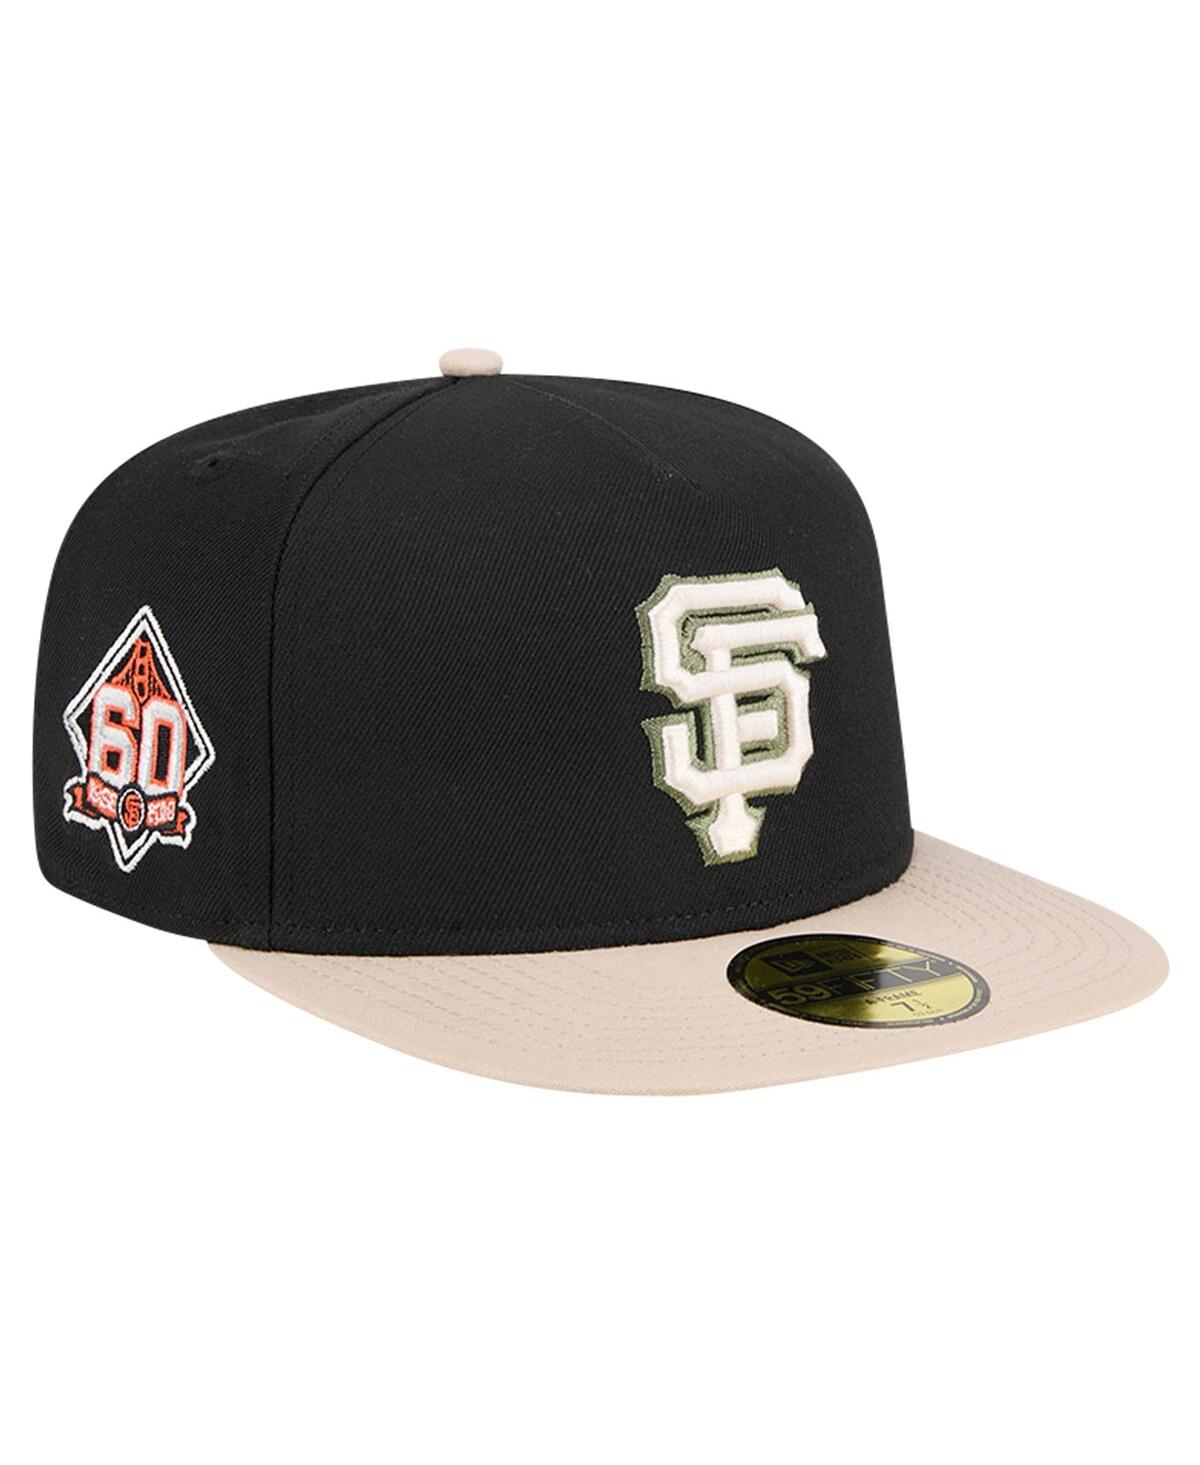 NEW ERA MEN'S NEW ERA BLACK SAN FRANCISCO GIANTS CANVAS A-FRAME 59FIFTY FITTED HAT